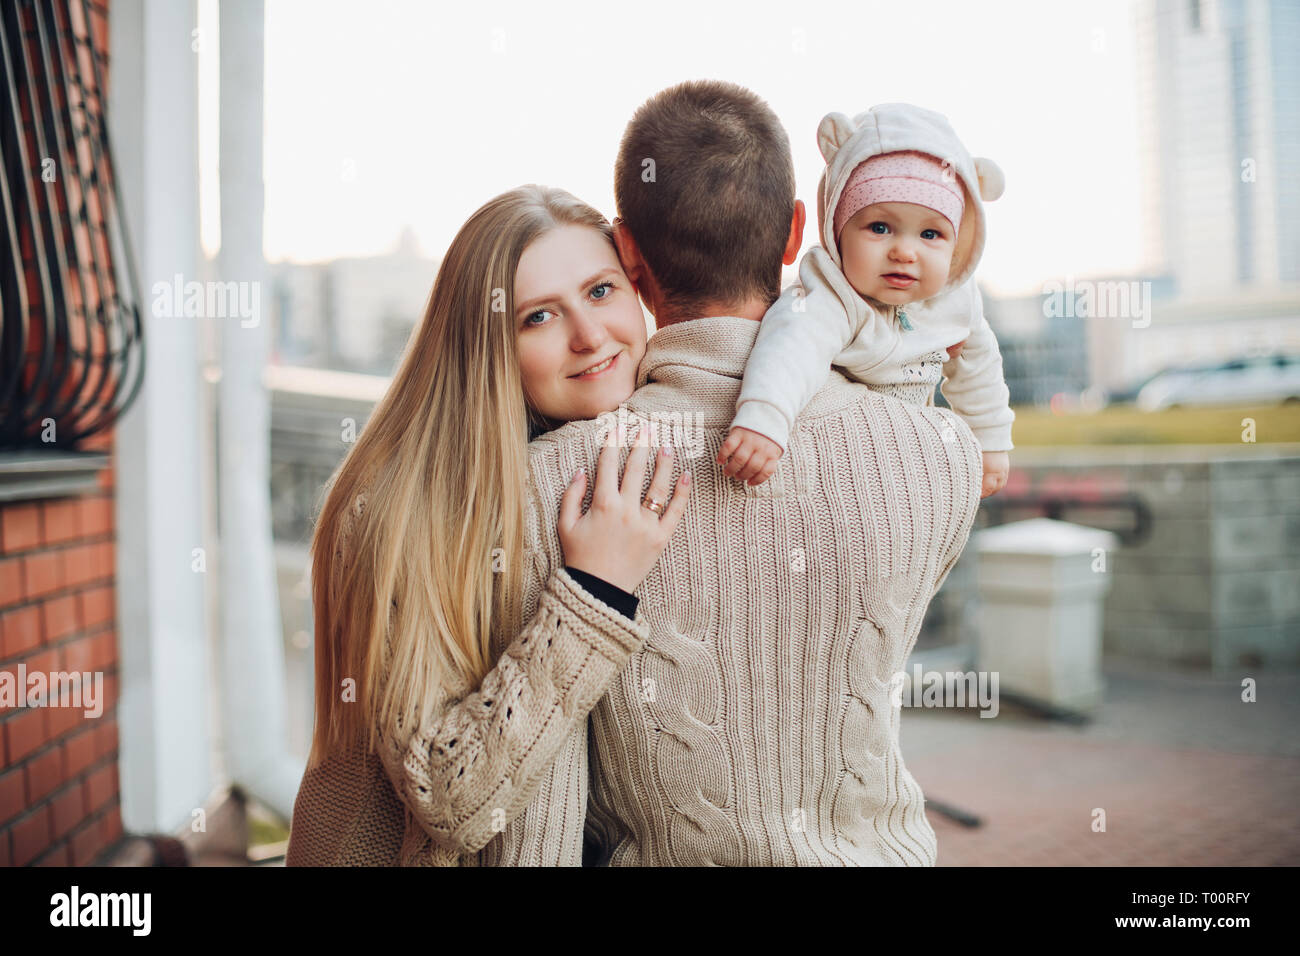 Young happy family smiling at camera and standing together. Stock Photo